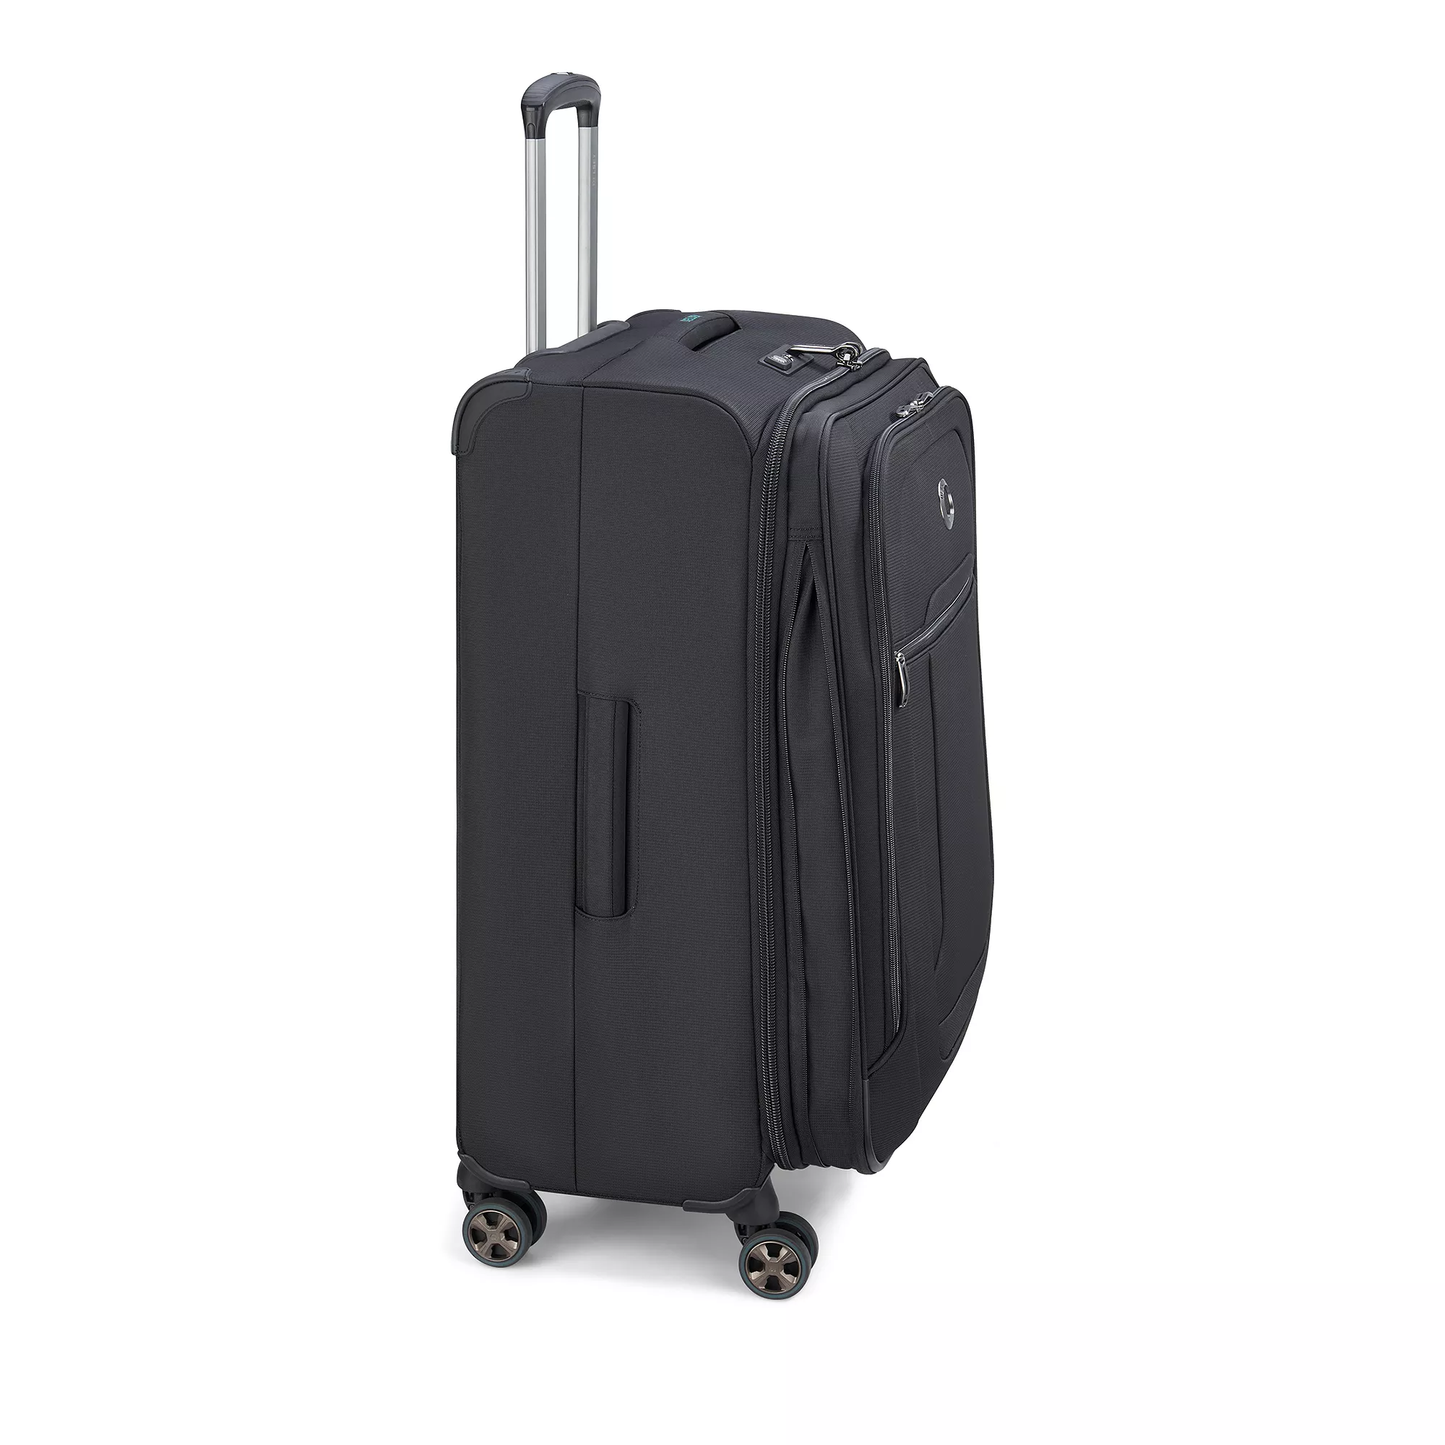 Delsey Helium DLX Softcase Luggage (MEDIUM) (UP TO 30% OFF)